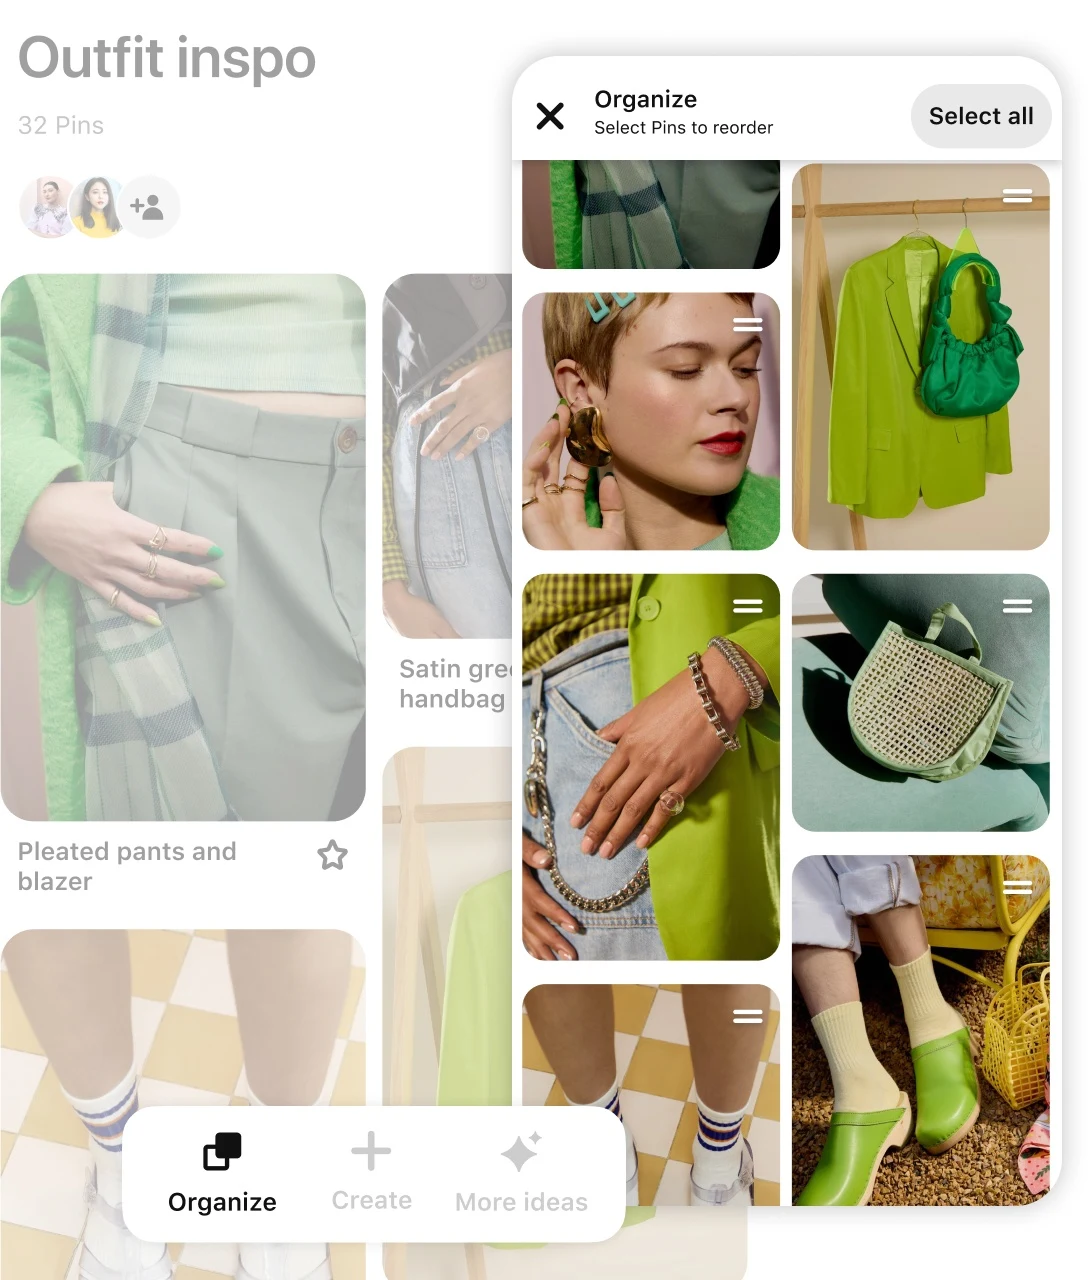 Pin grid featuring various green accessories and clothing items